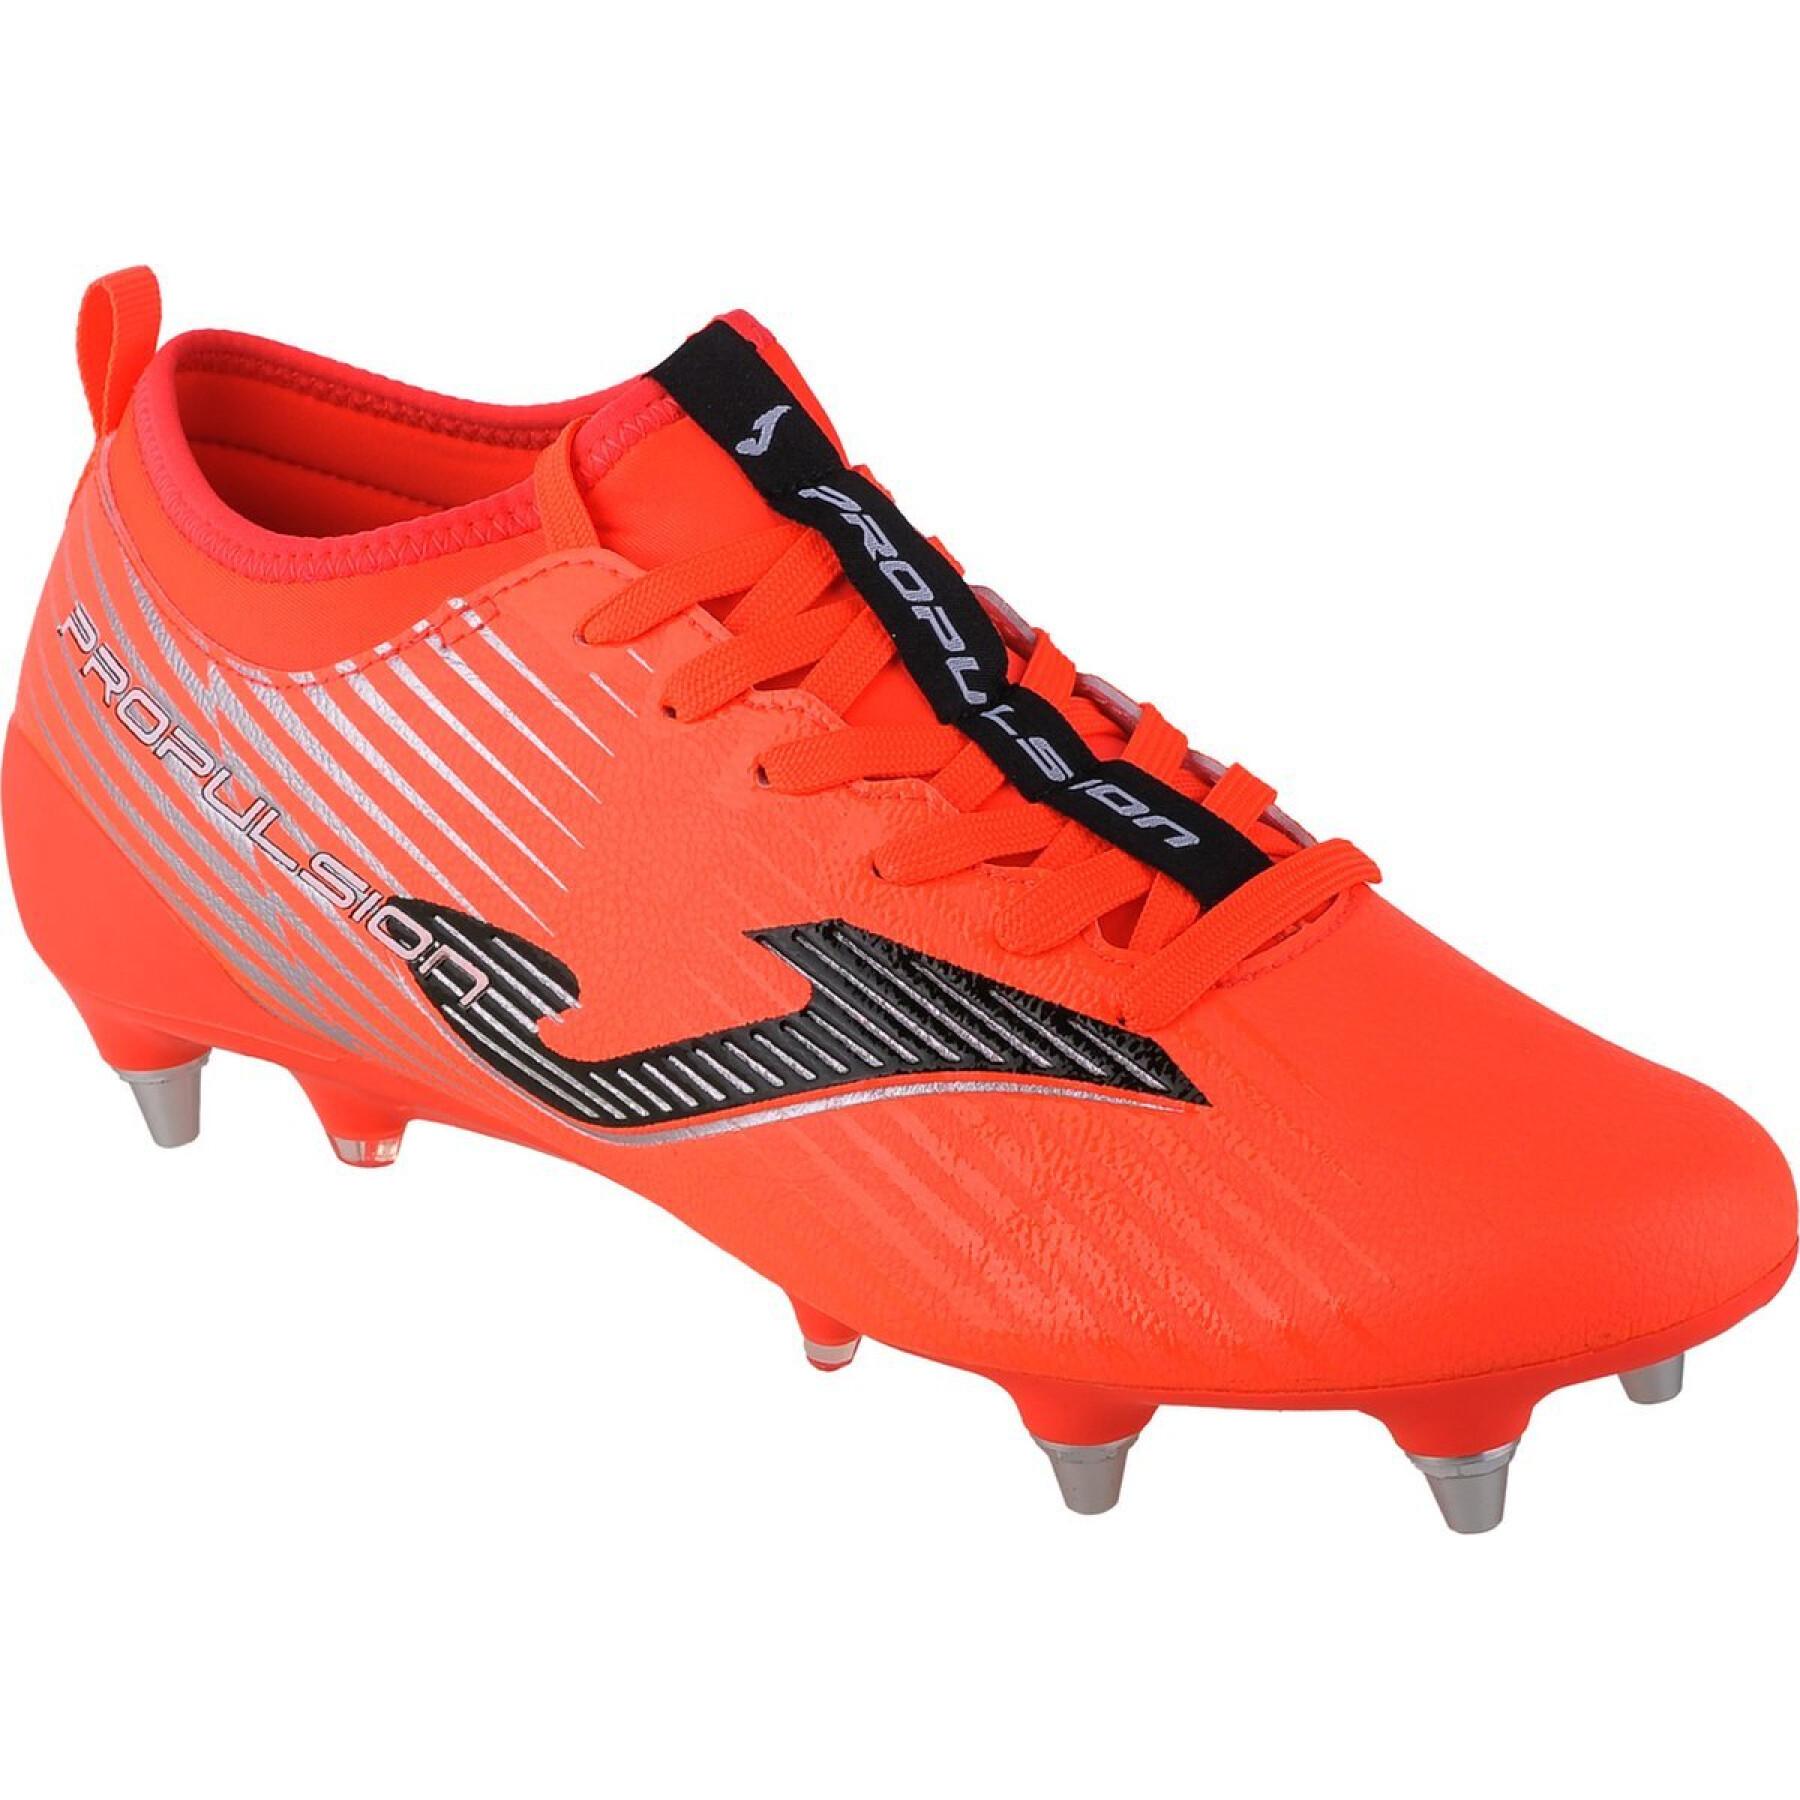 Soccer shoes Joma Propulsion Cup 2308 SG